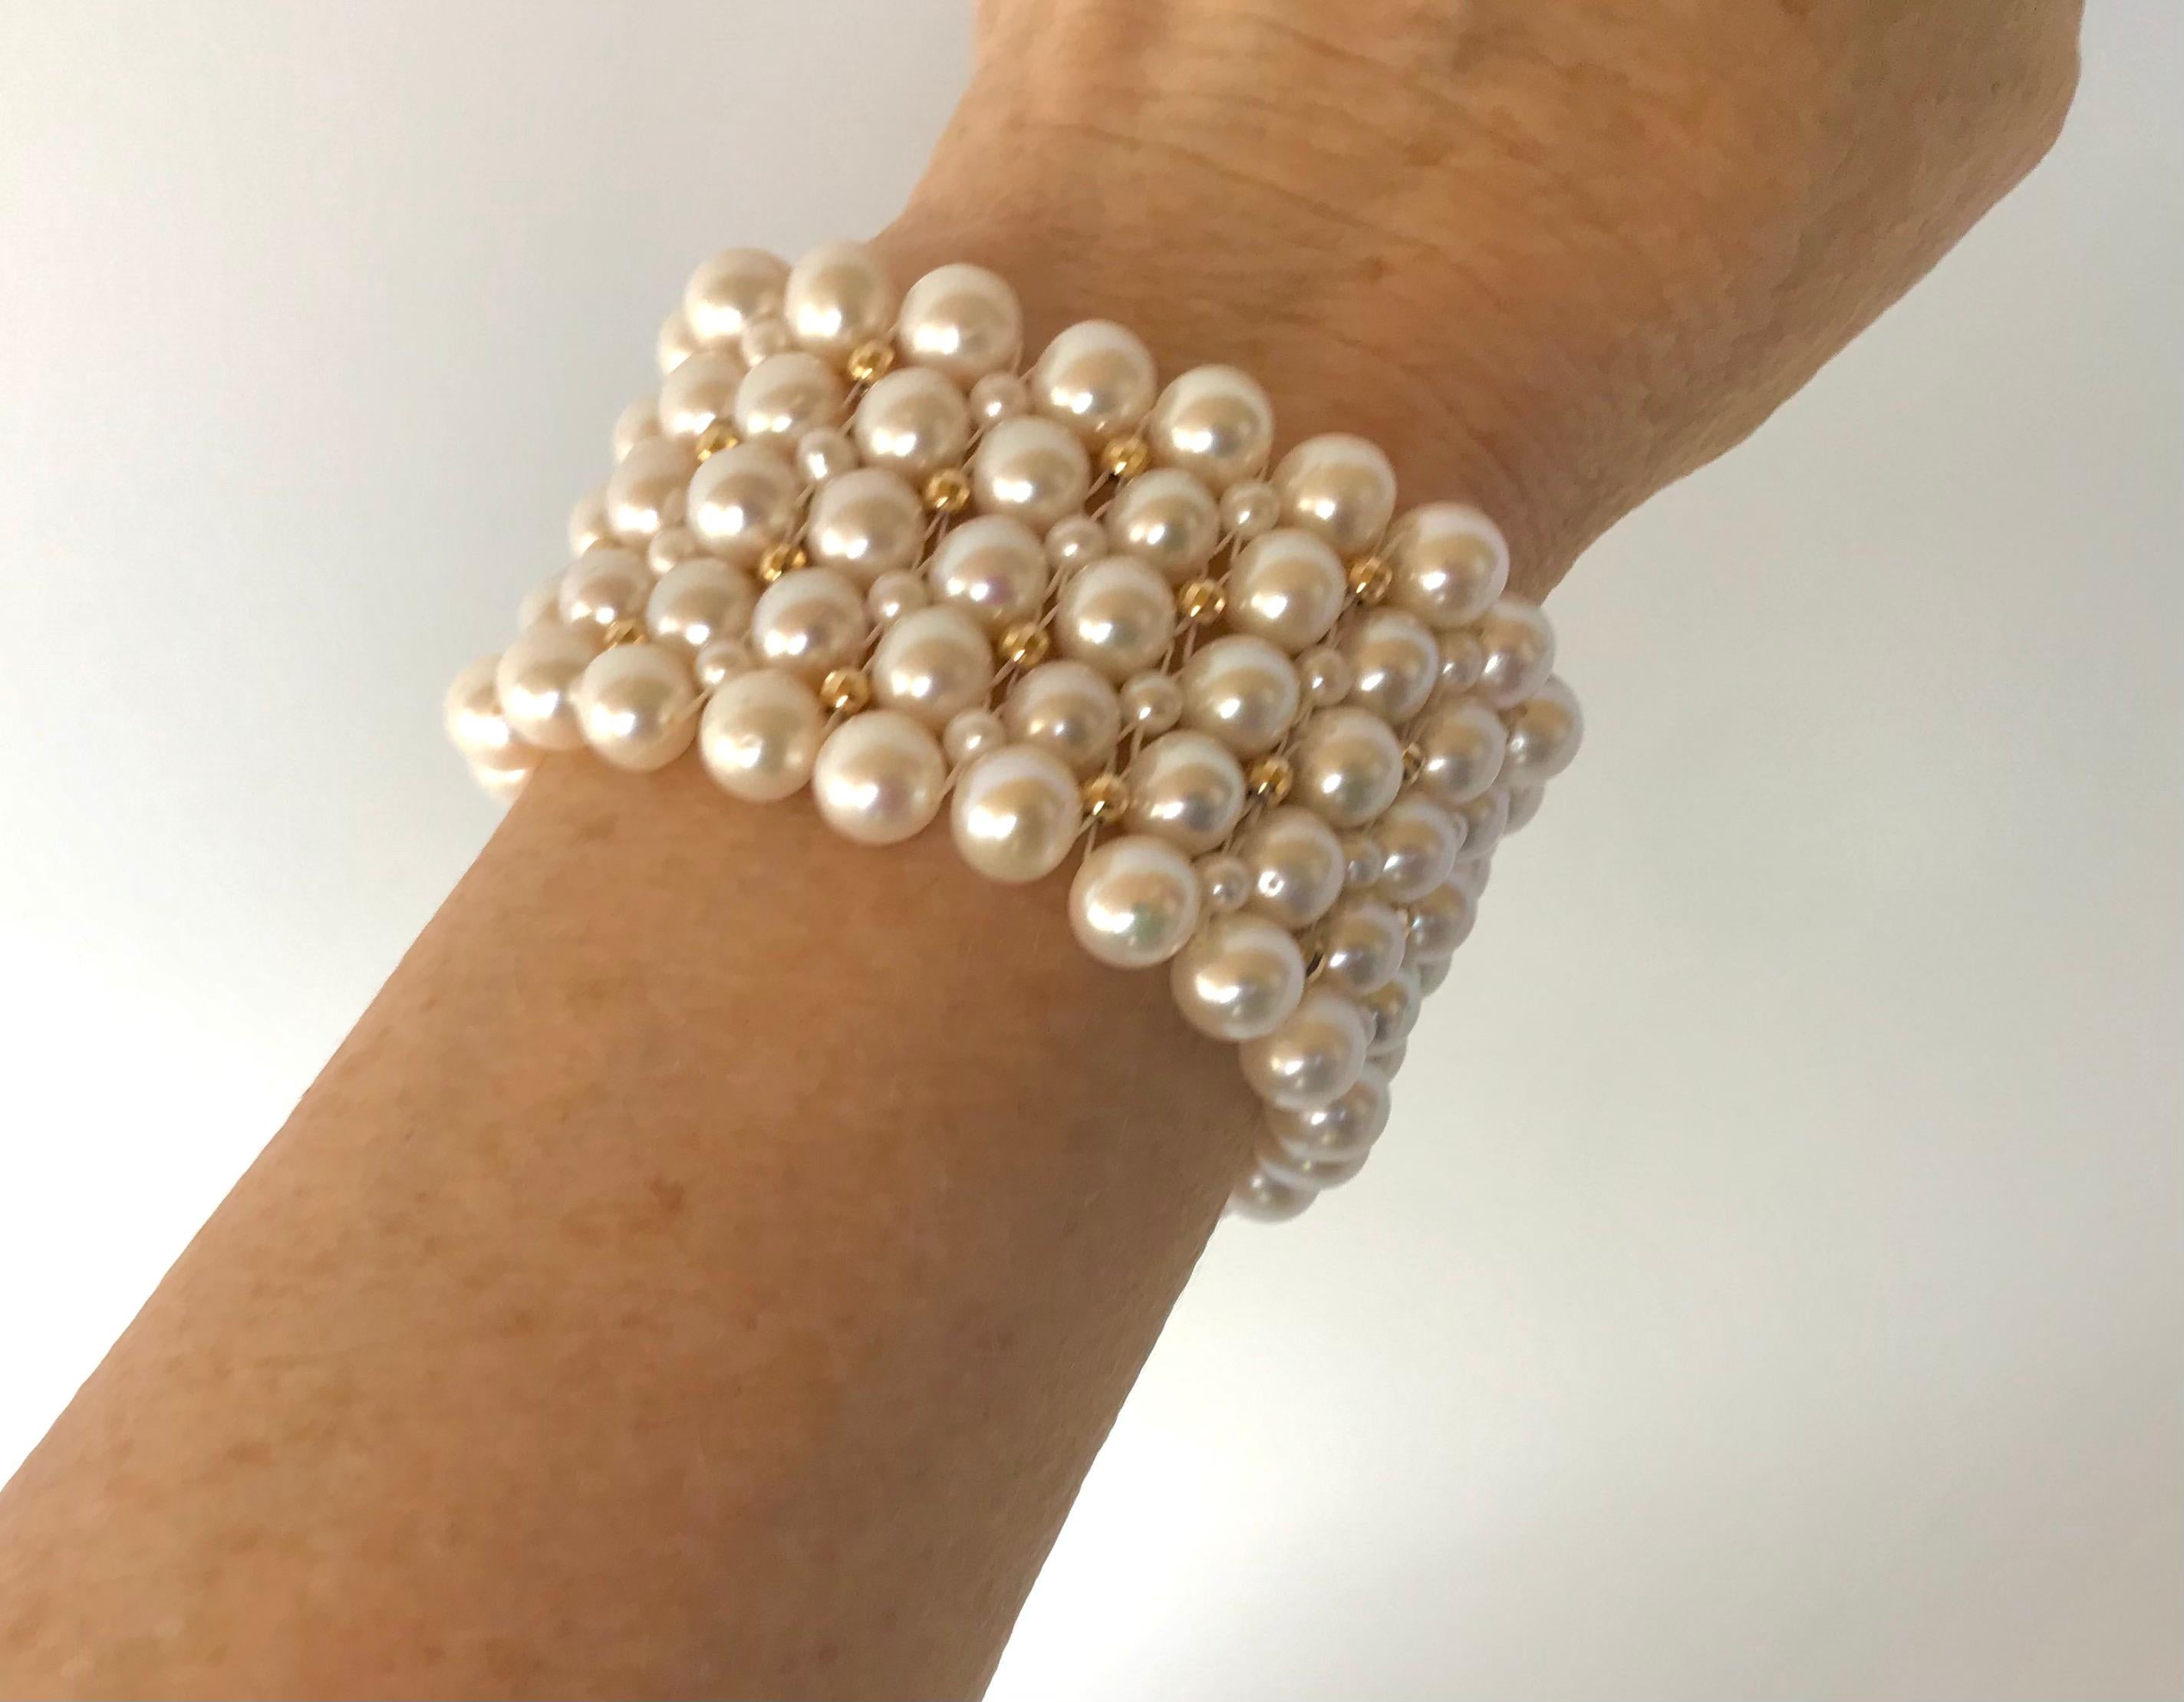 Marina J Stunning Woven Pearl Bracelet with 14 Karat Yellow Gold Beads and Clasp For Sale 1